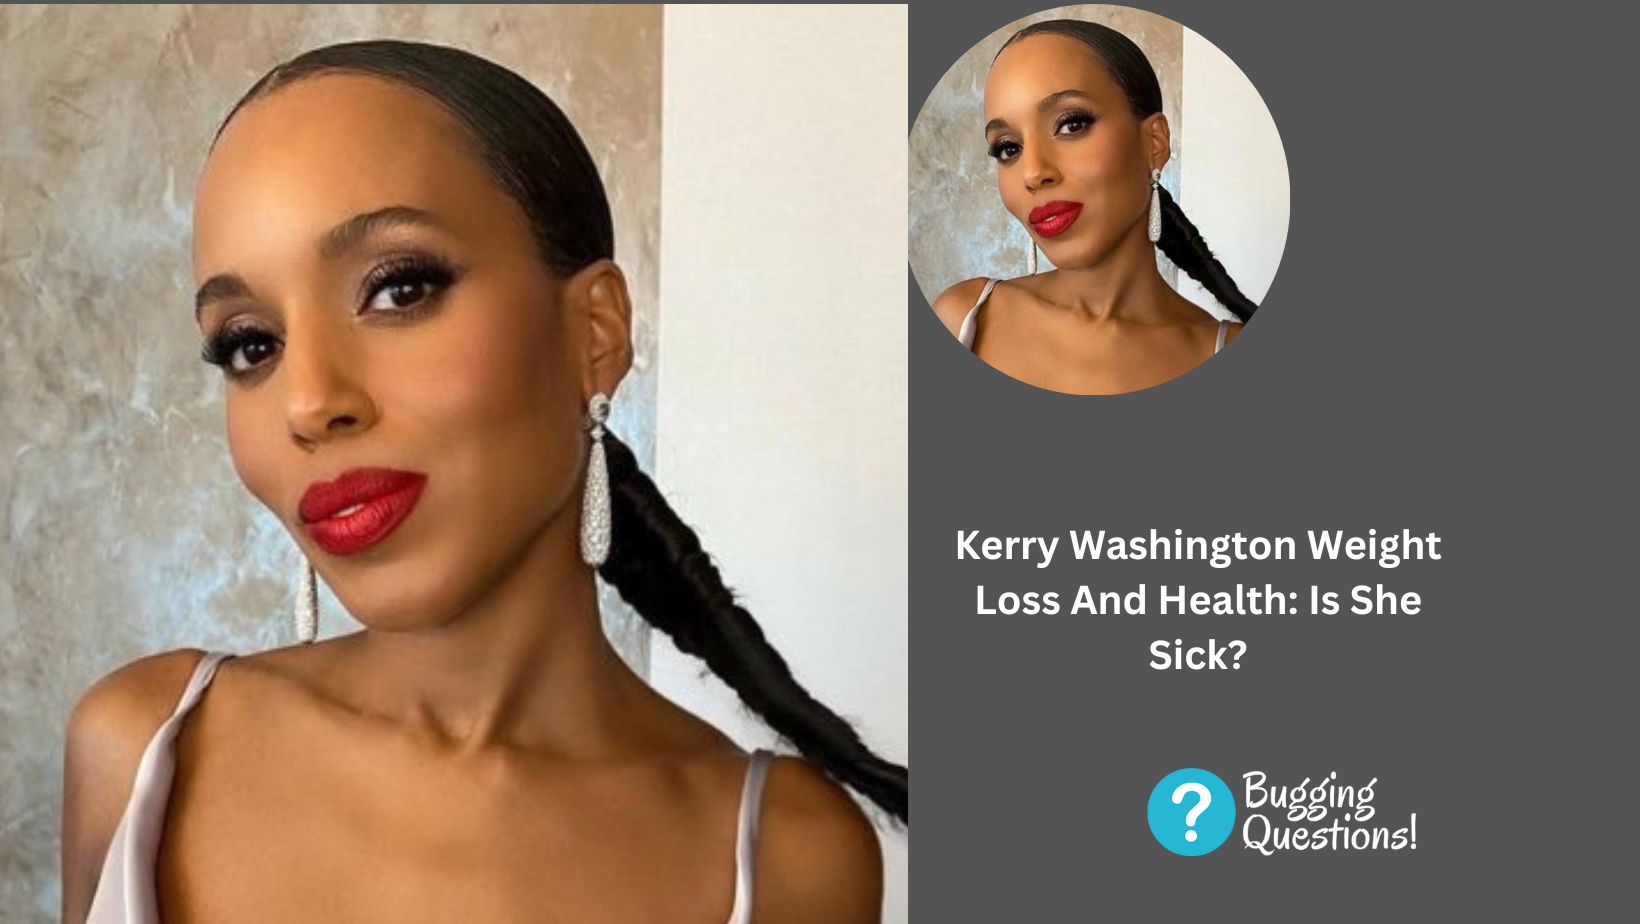 Kerry Washington Weight Loss And Health: Is She Sick?